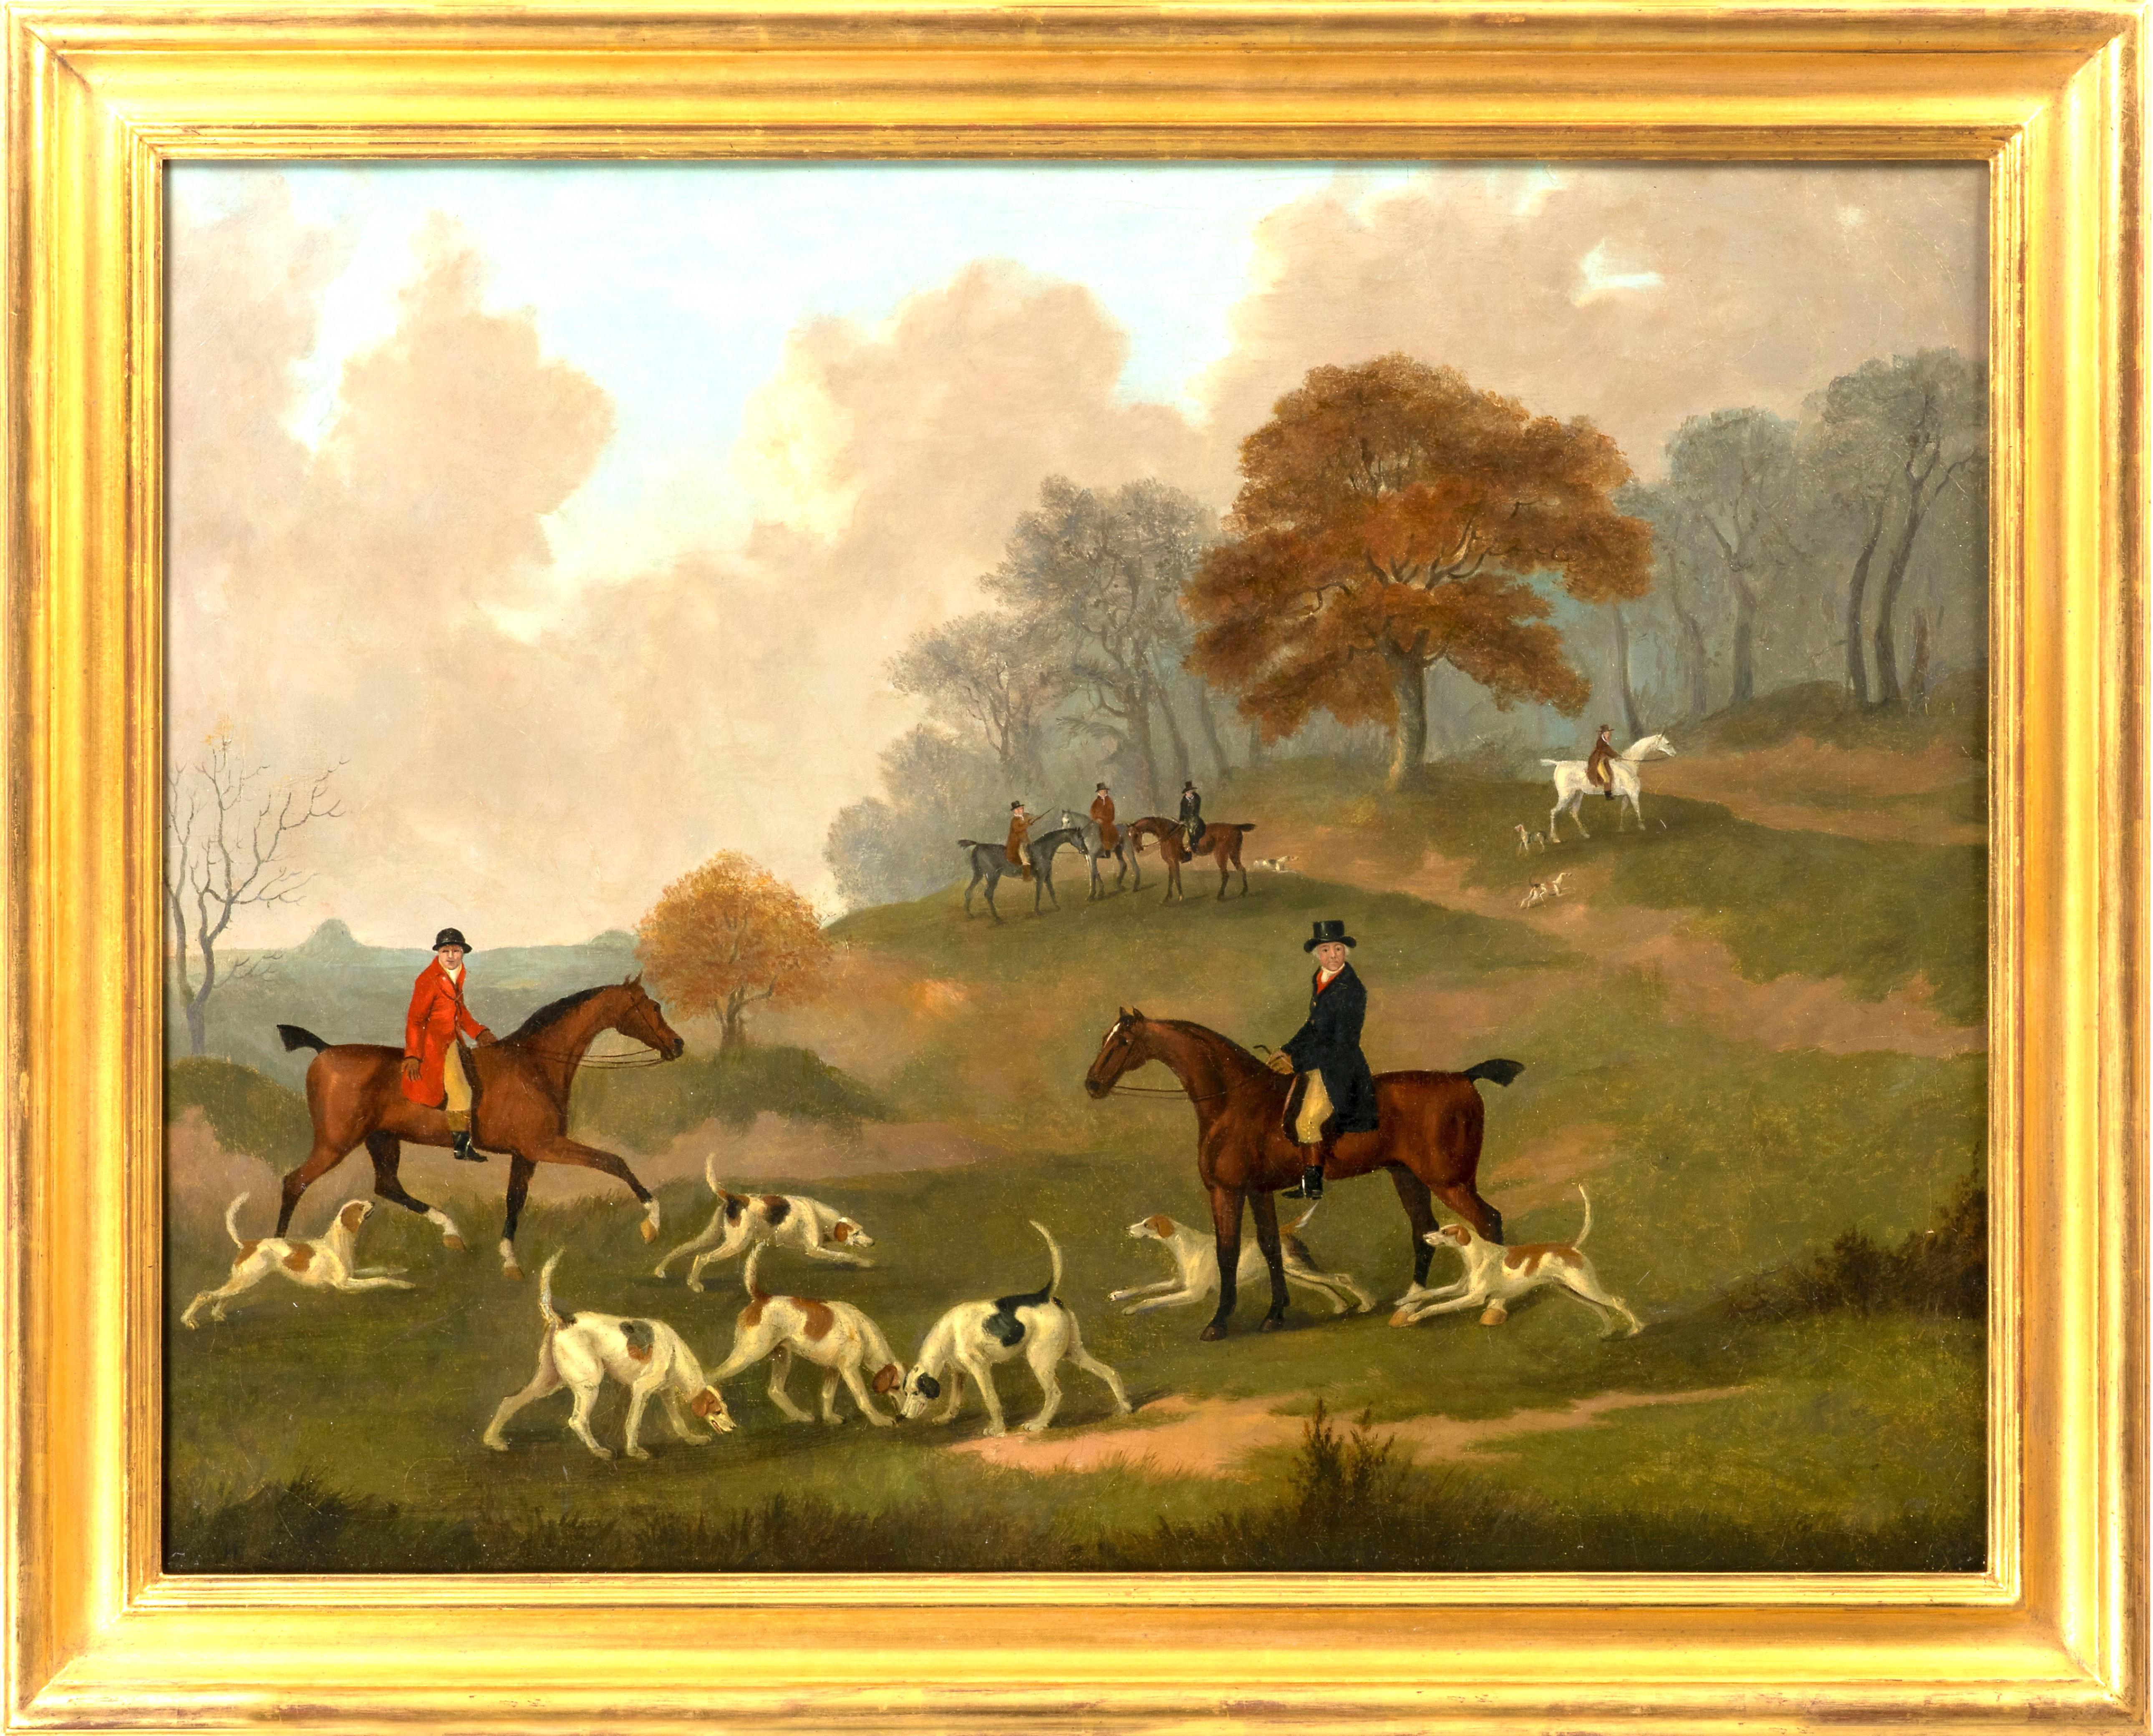 Francis R Williams Landscape Painting - The Earl of Darlington Foxhunting with The Raby Pack: "Drawing Cover